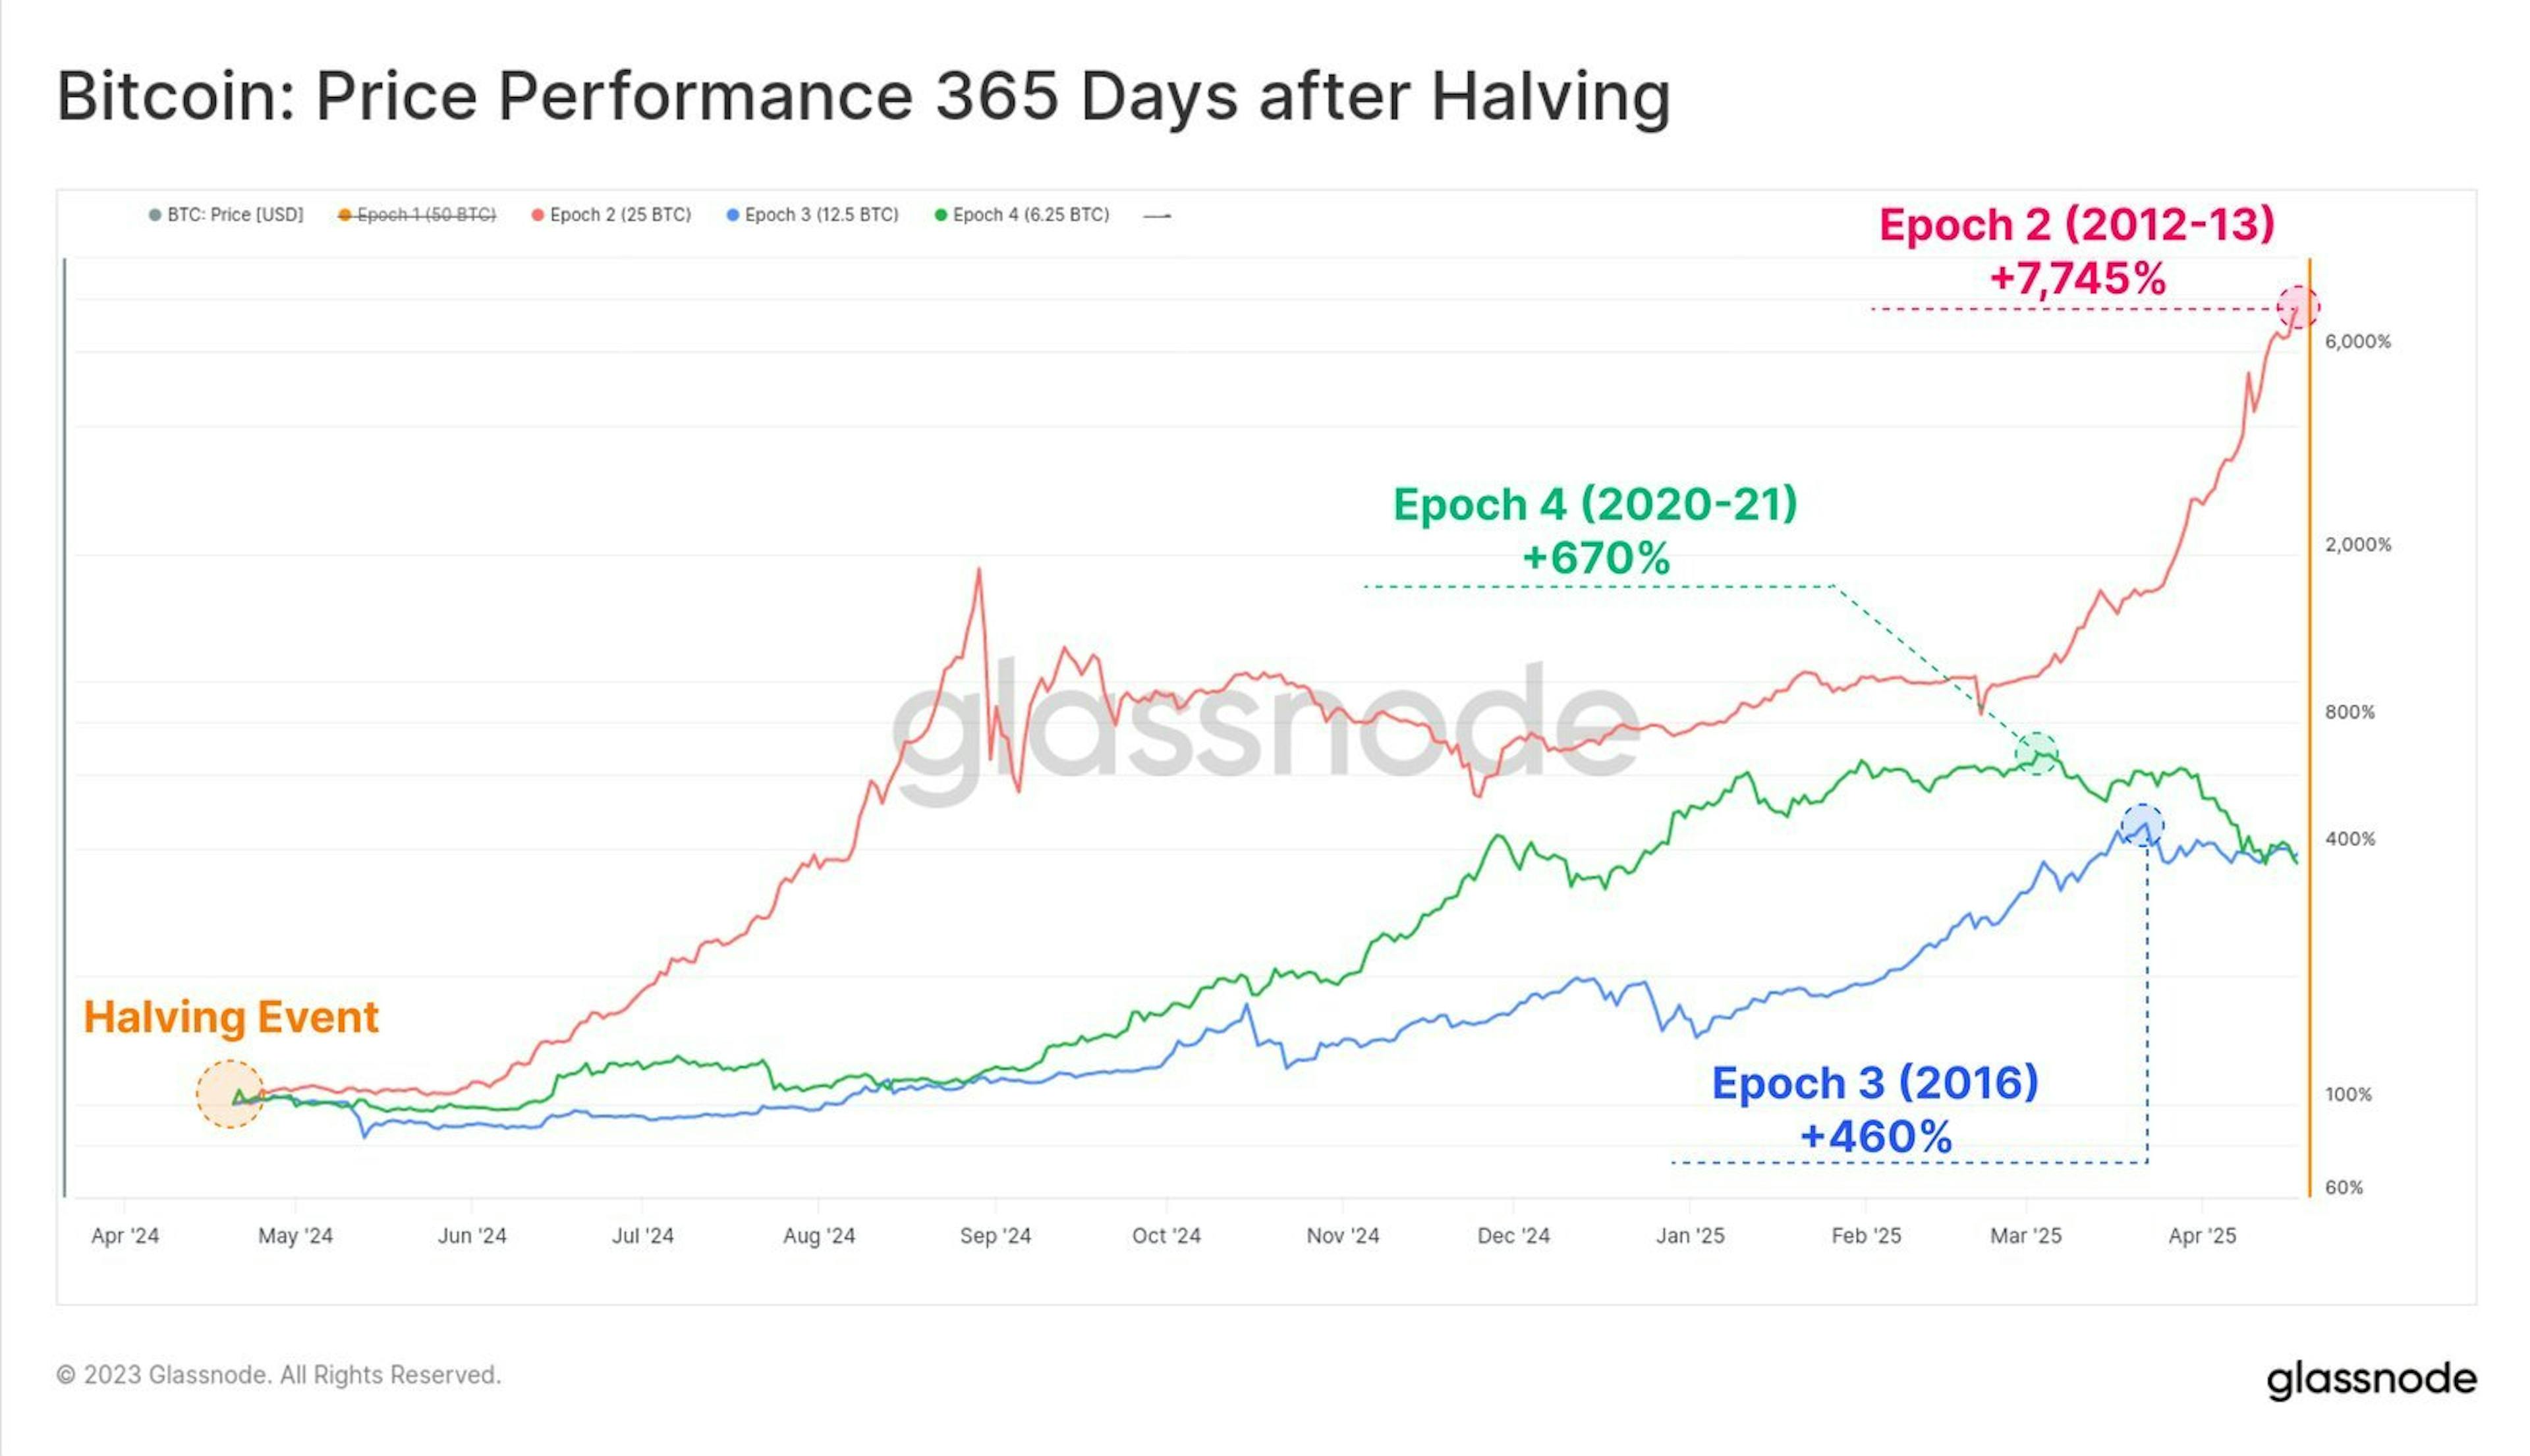 Bitcoin price performance 365 days after halving